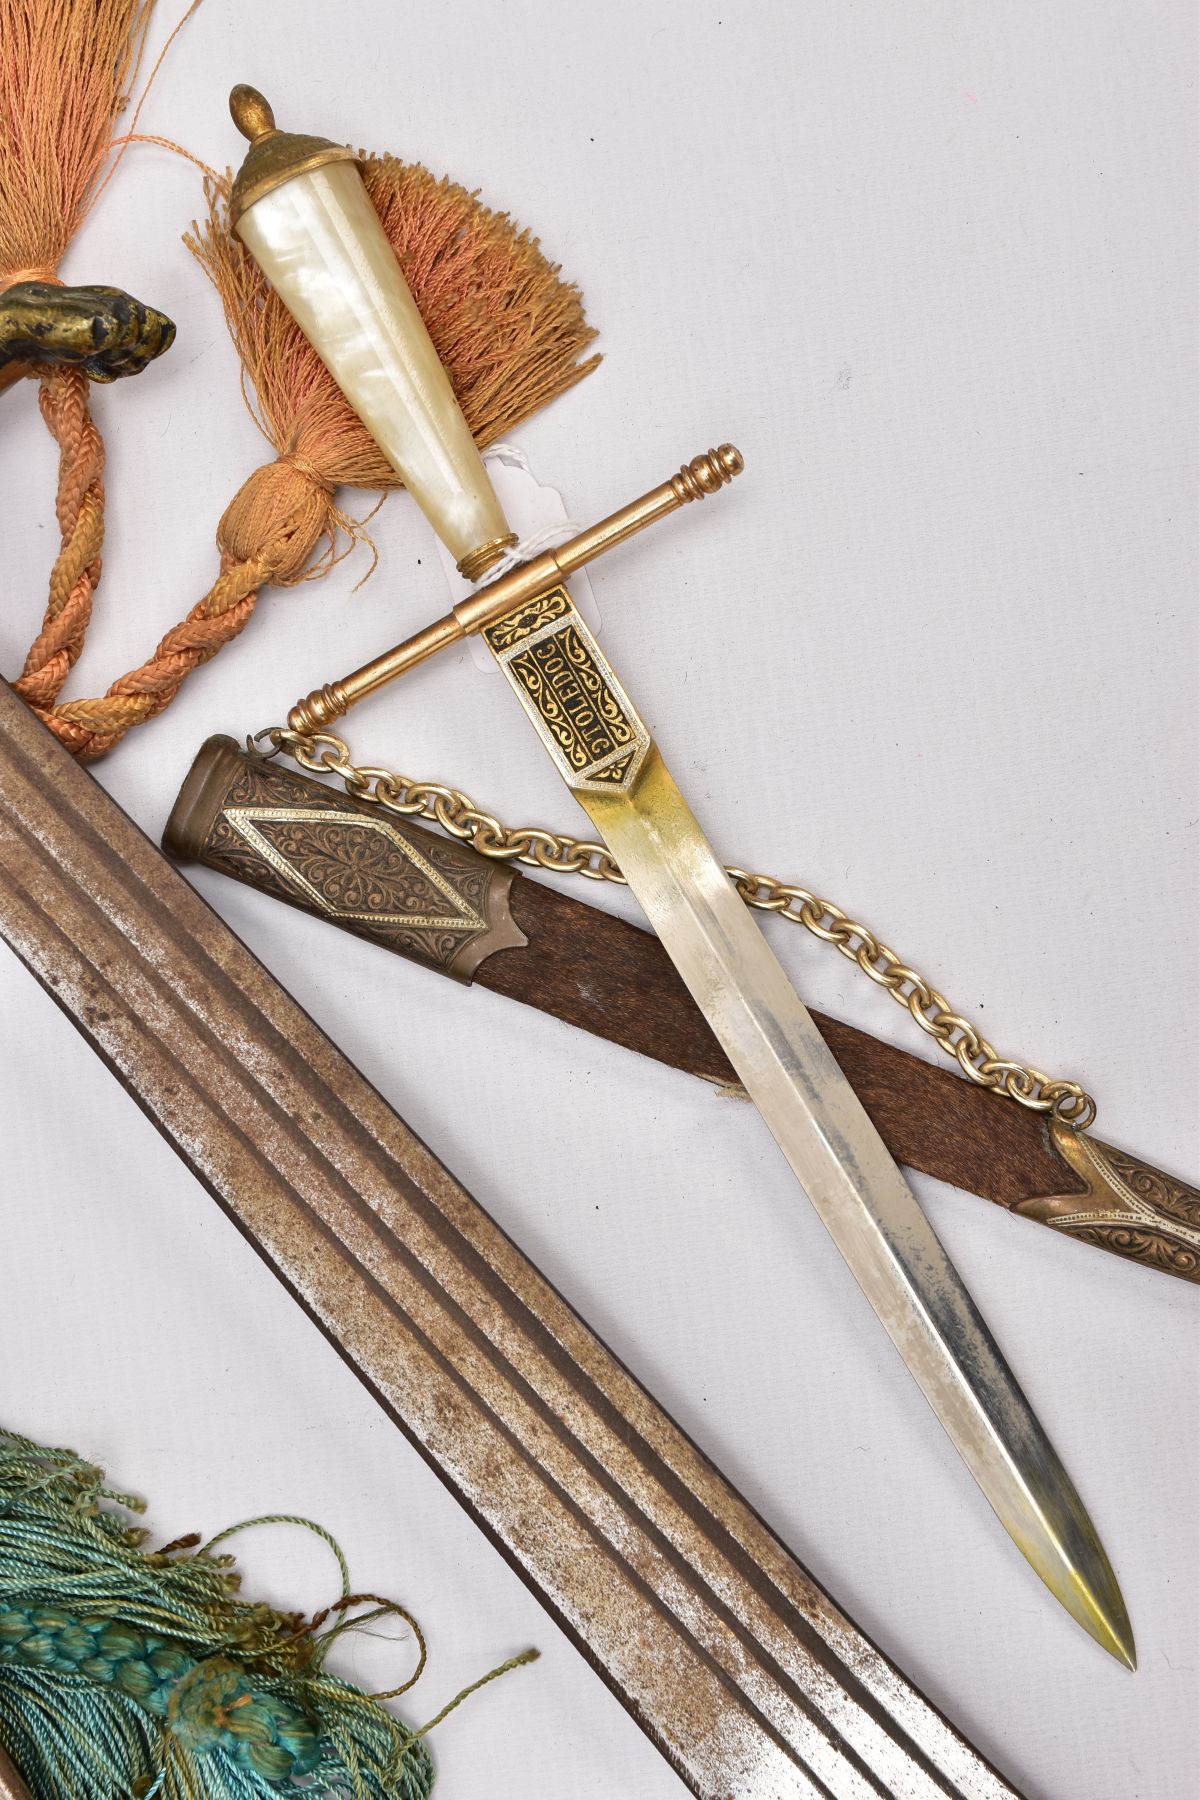 FIVE ASSORTED BLADED WEAPONS, two small short swords, curved blades, poorly constructed, knots in - Image 10 of 14